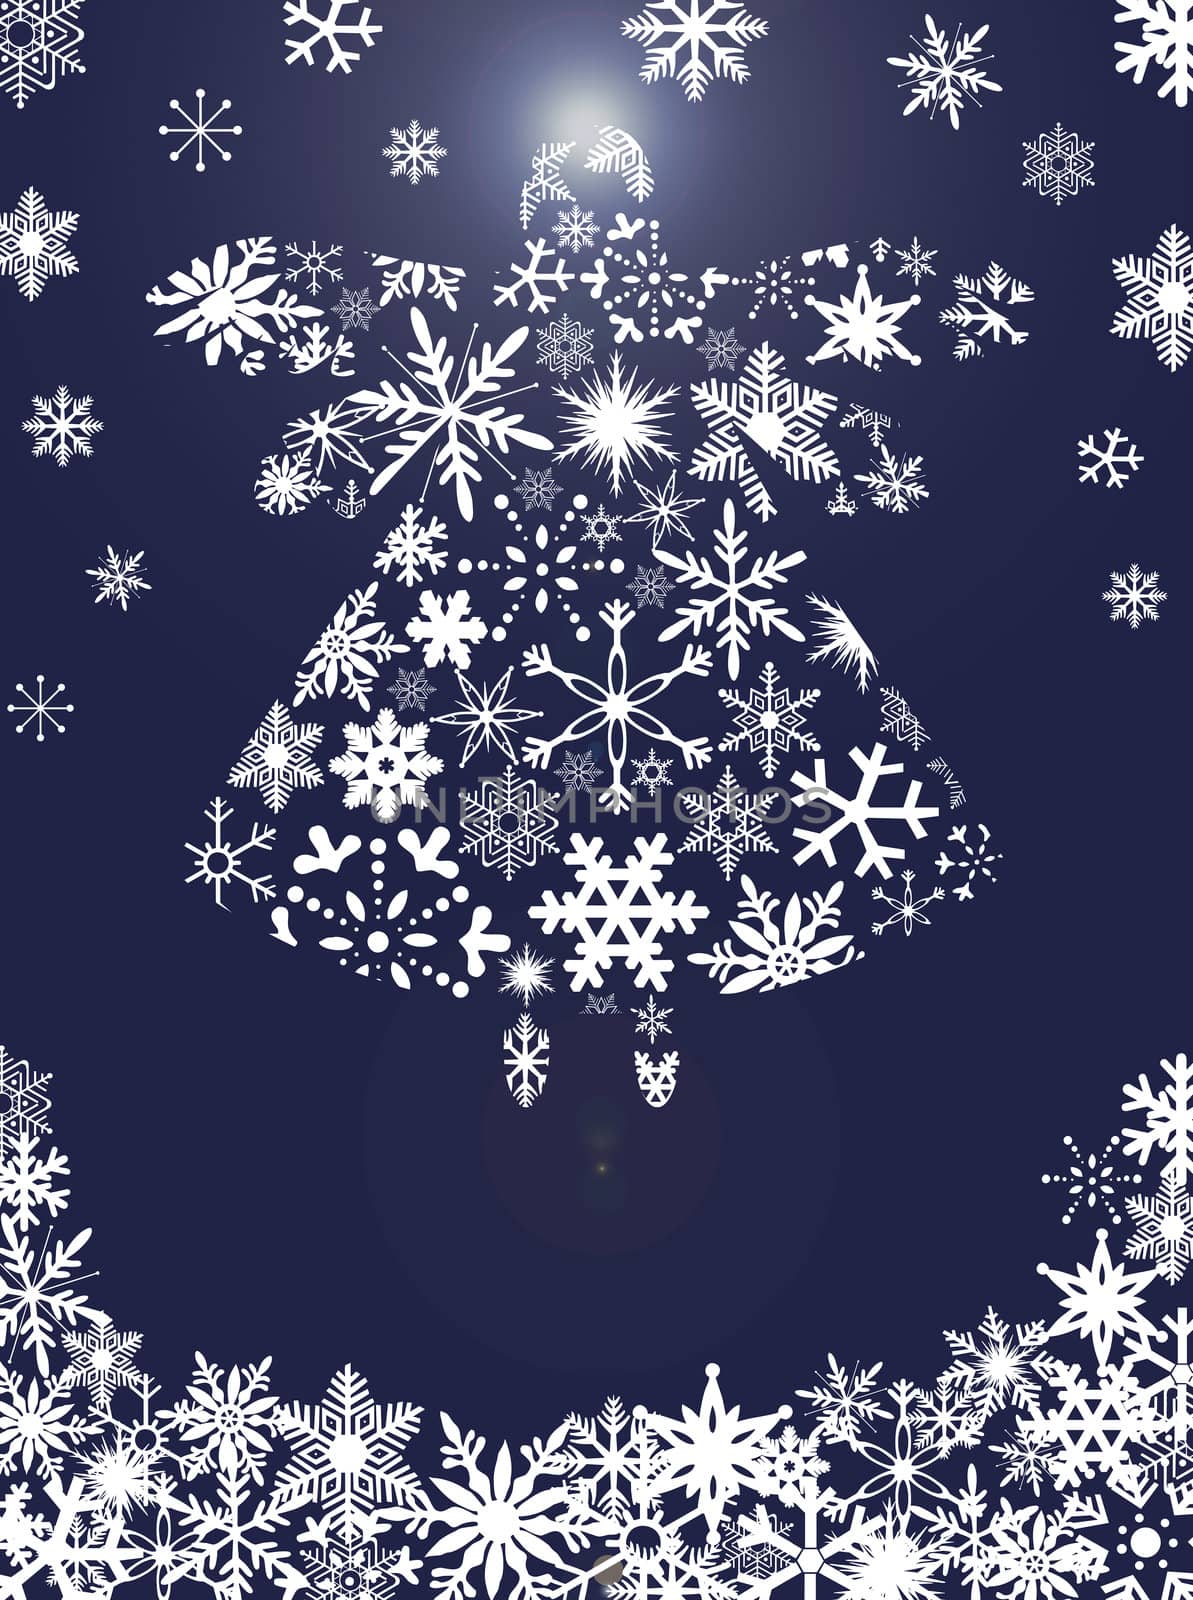 Christmas Angel Flying with Snowflakes Design Blue Background Illustration